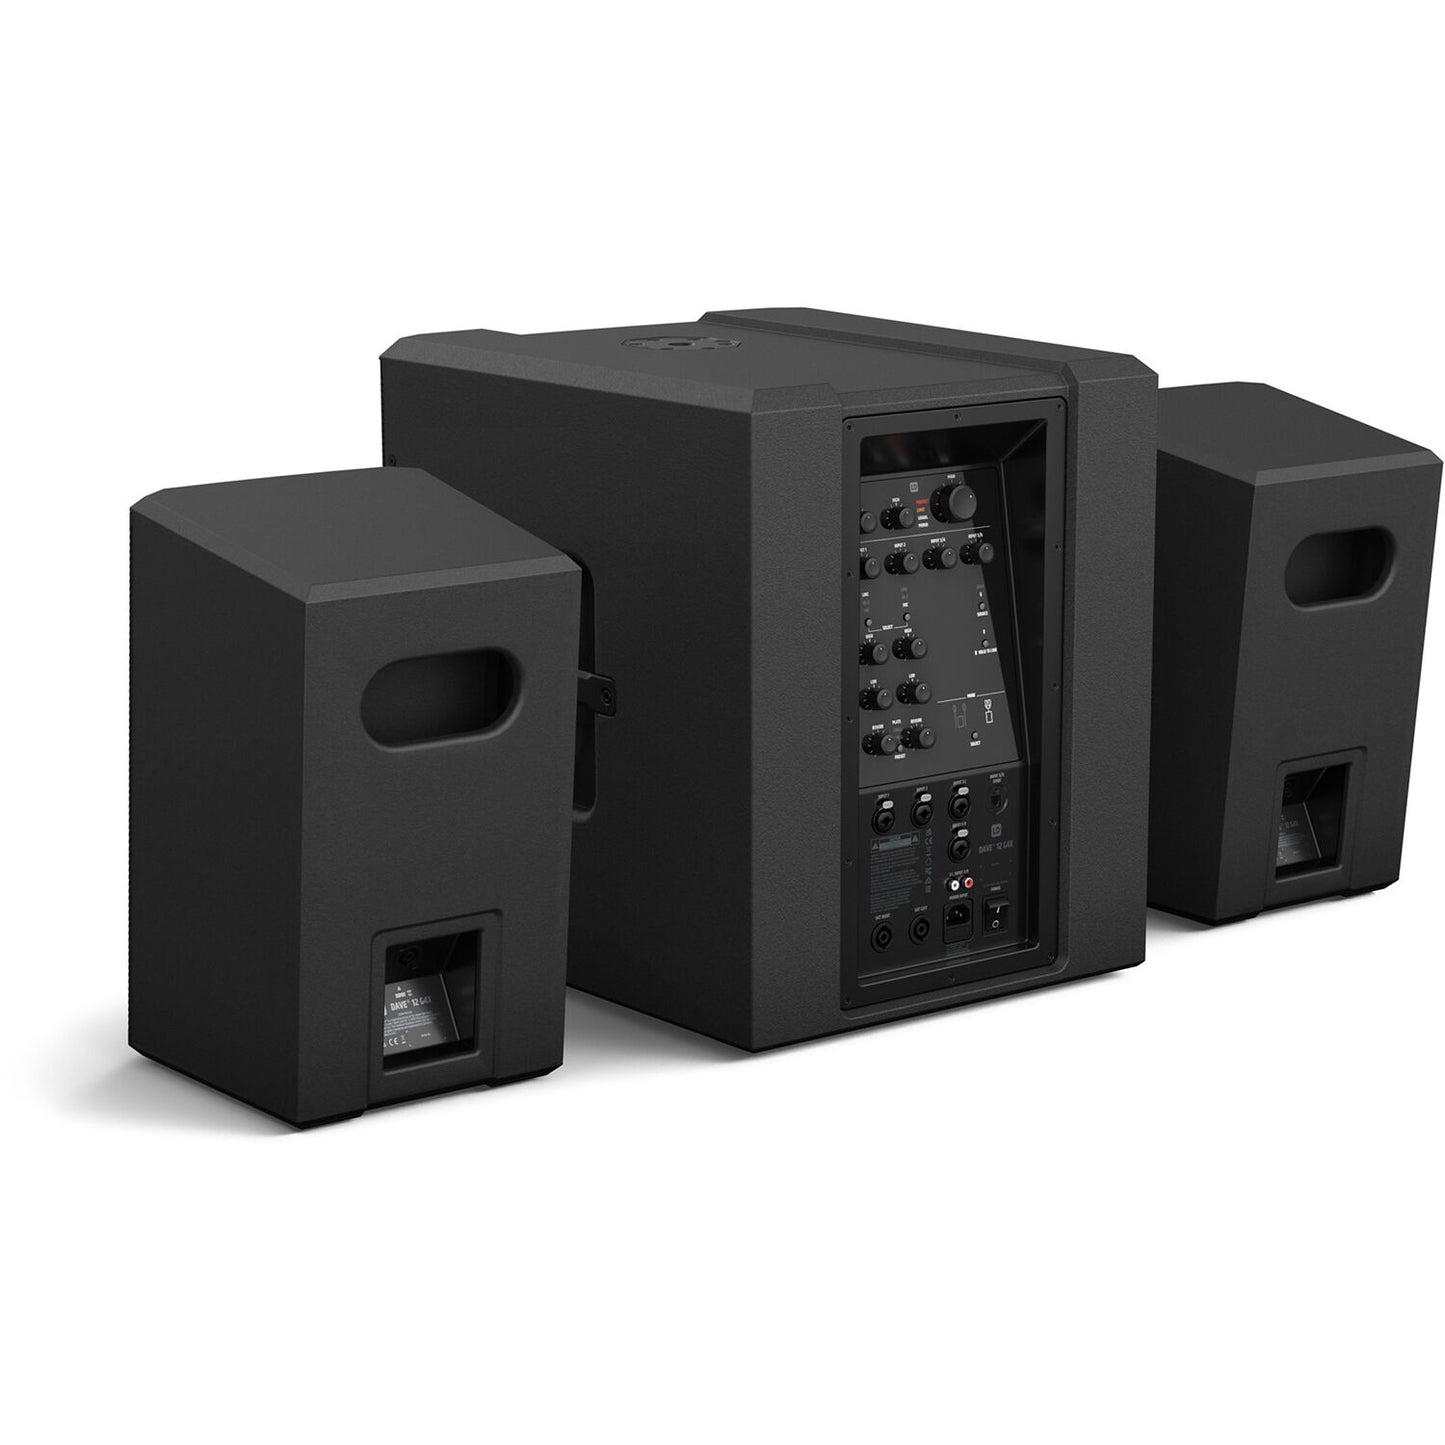 Ld Systems DAVE 12 G4X Compact 2.1 Powered PA System